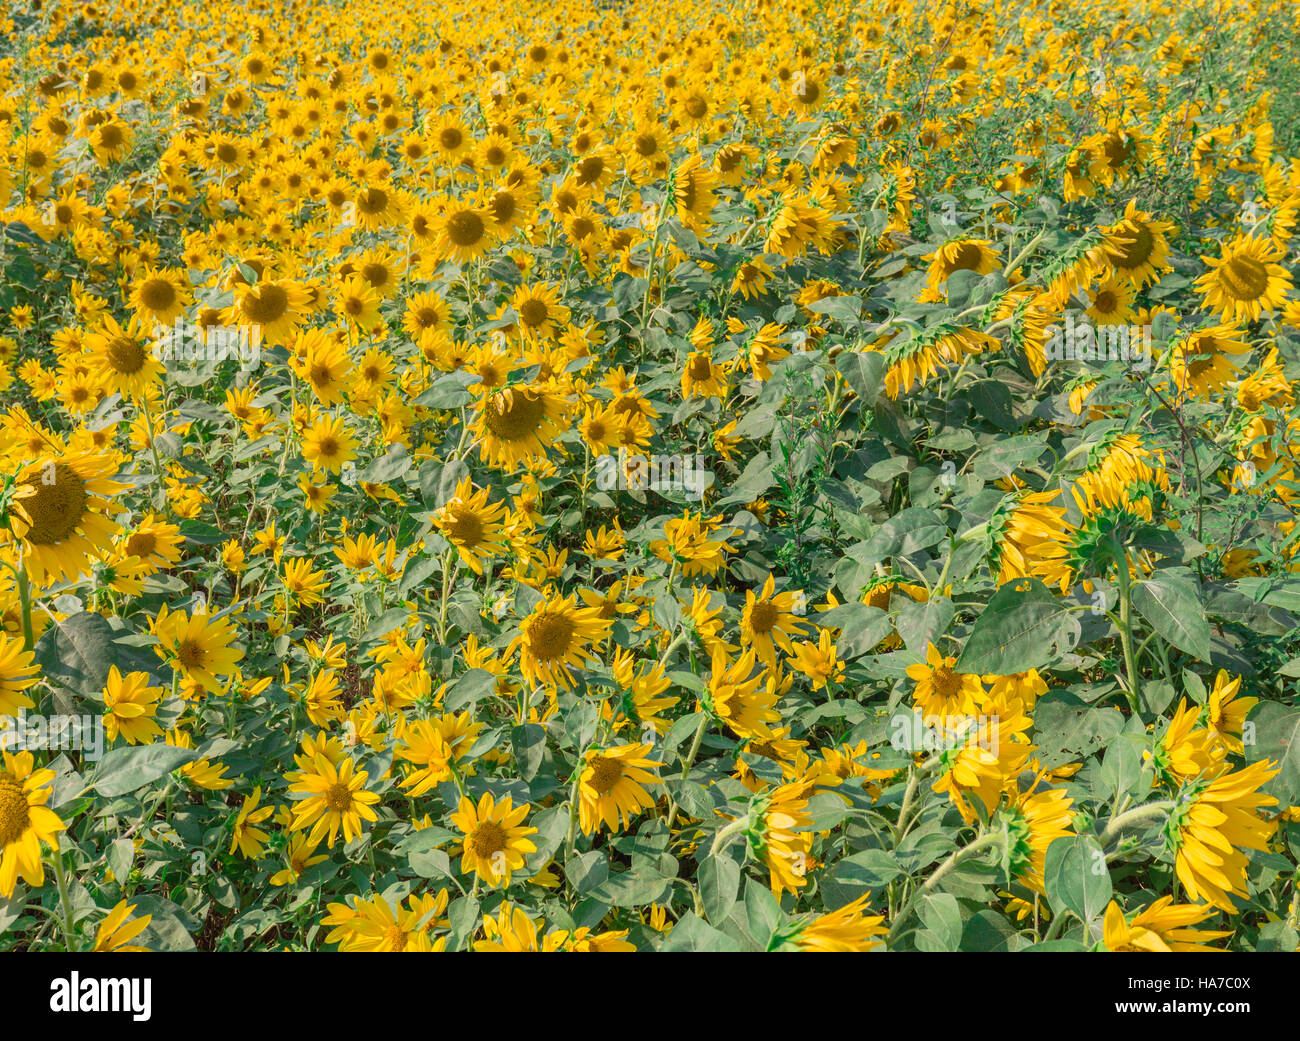 field of sunflowers with thousands of blooms Stock Photo